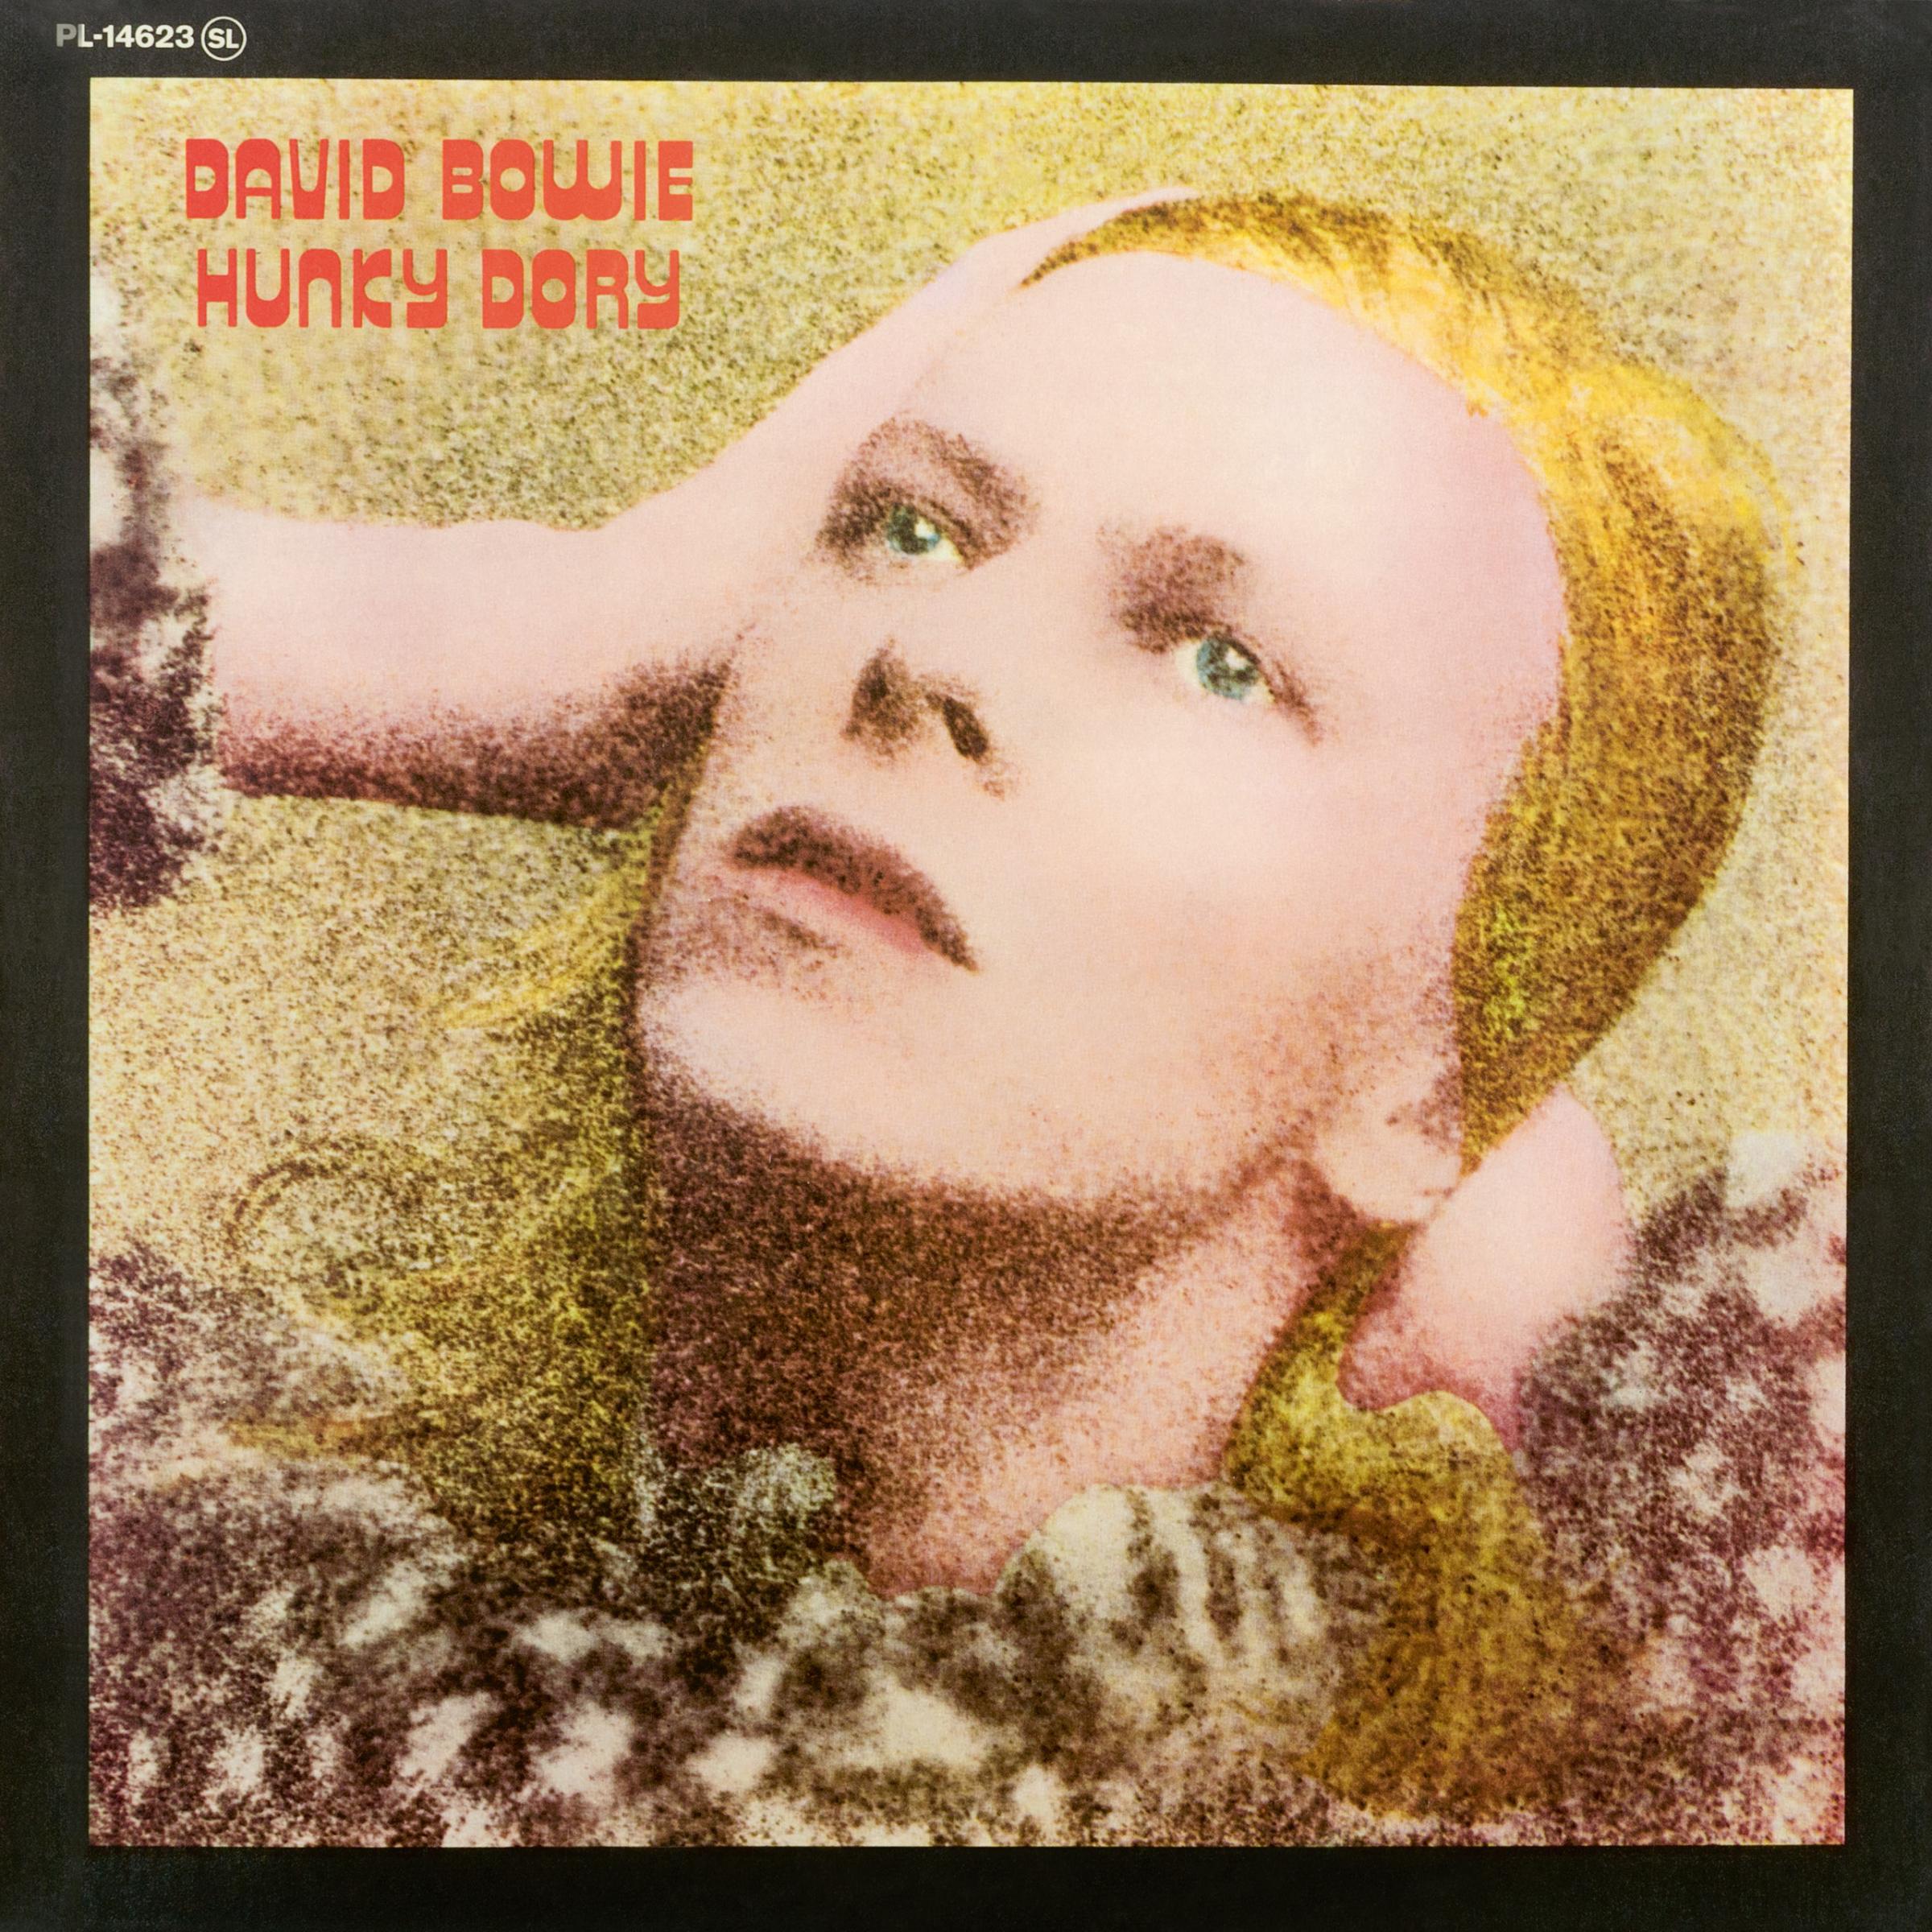 David Bowie; Hunky Dory; 1971; RCA; art director -- George Underwood; art -- Terry Pastor; photo -- Brian Ward